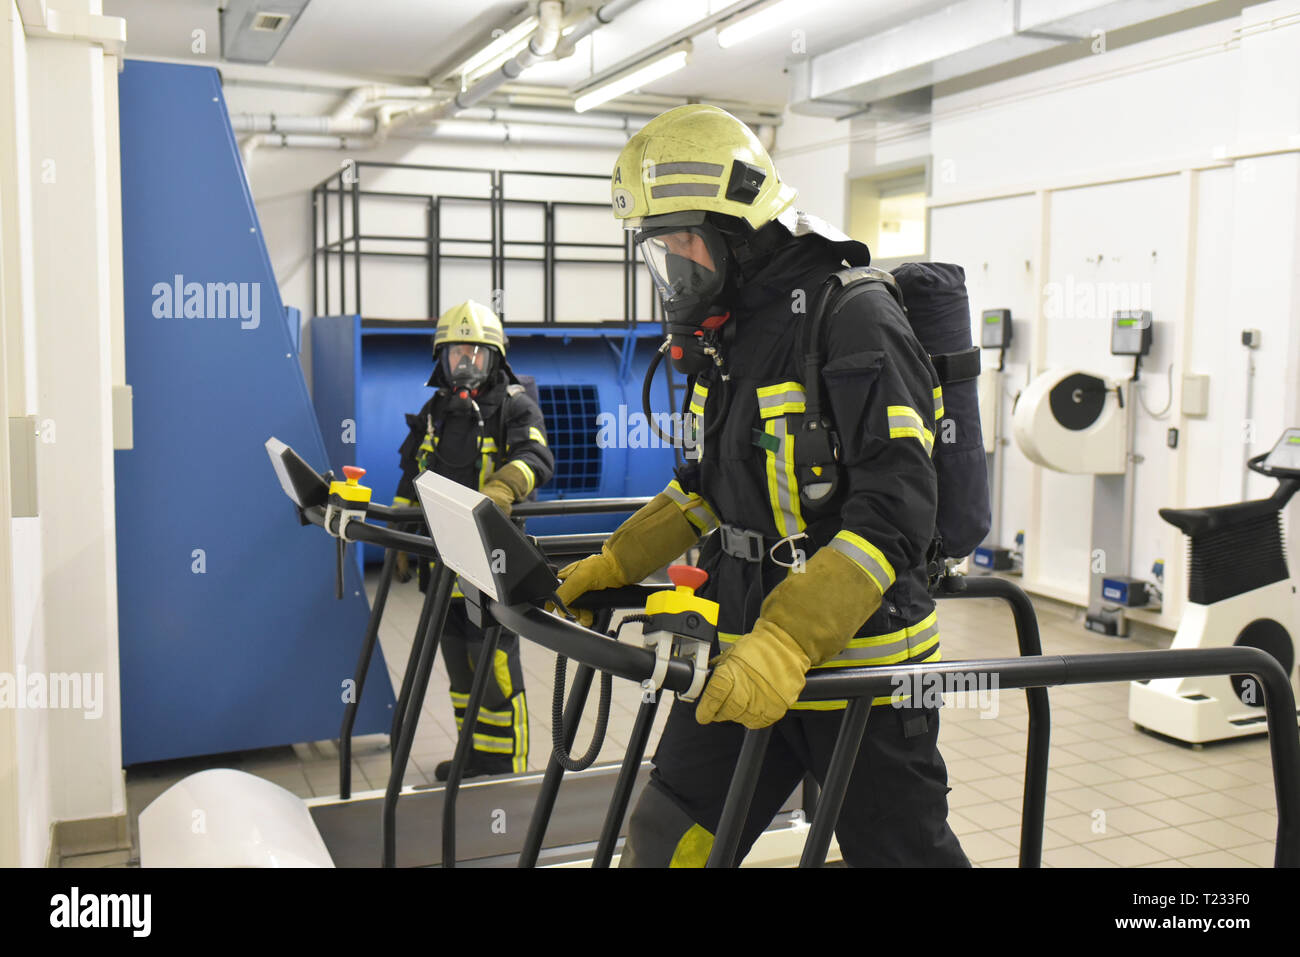 Two firefighters with respirator and air tank exercising in exercise room Stock Photo